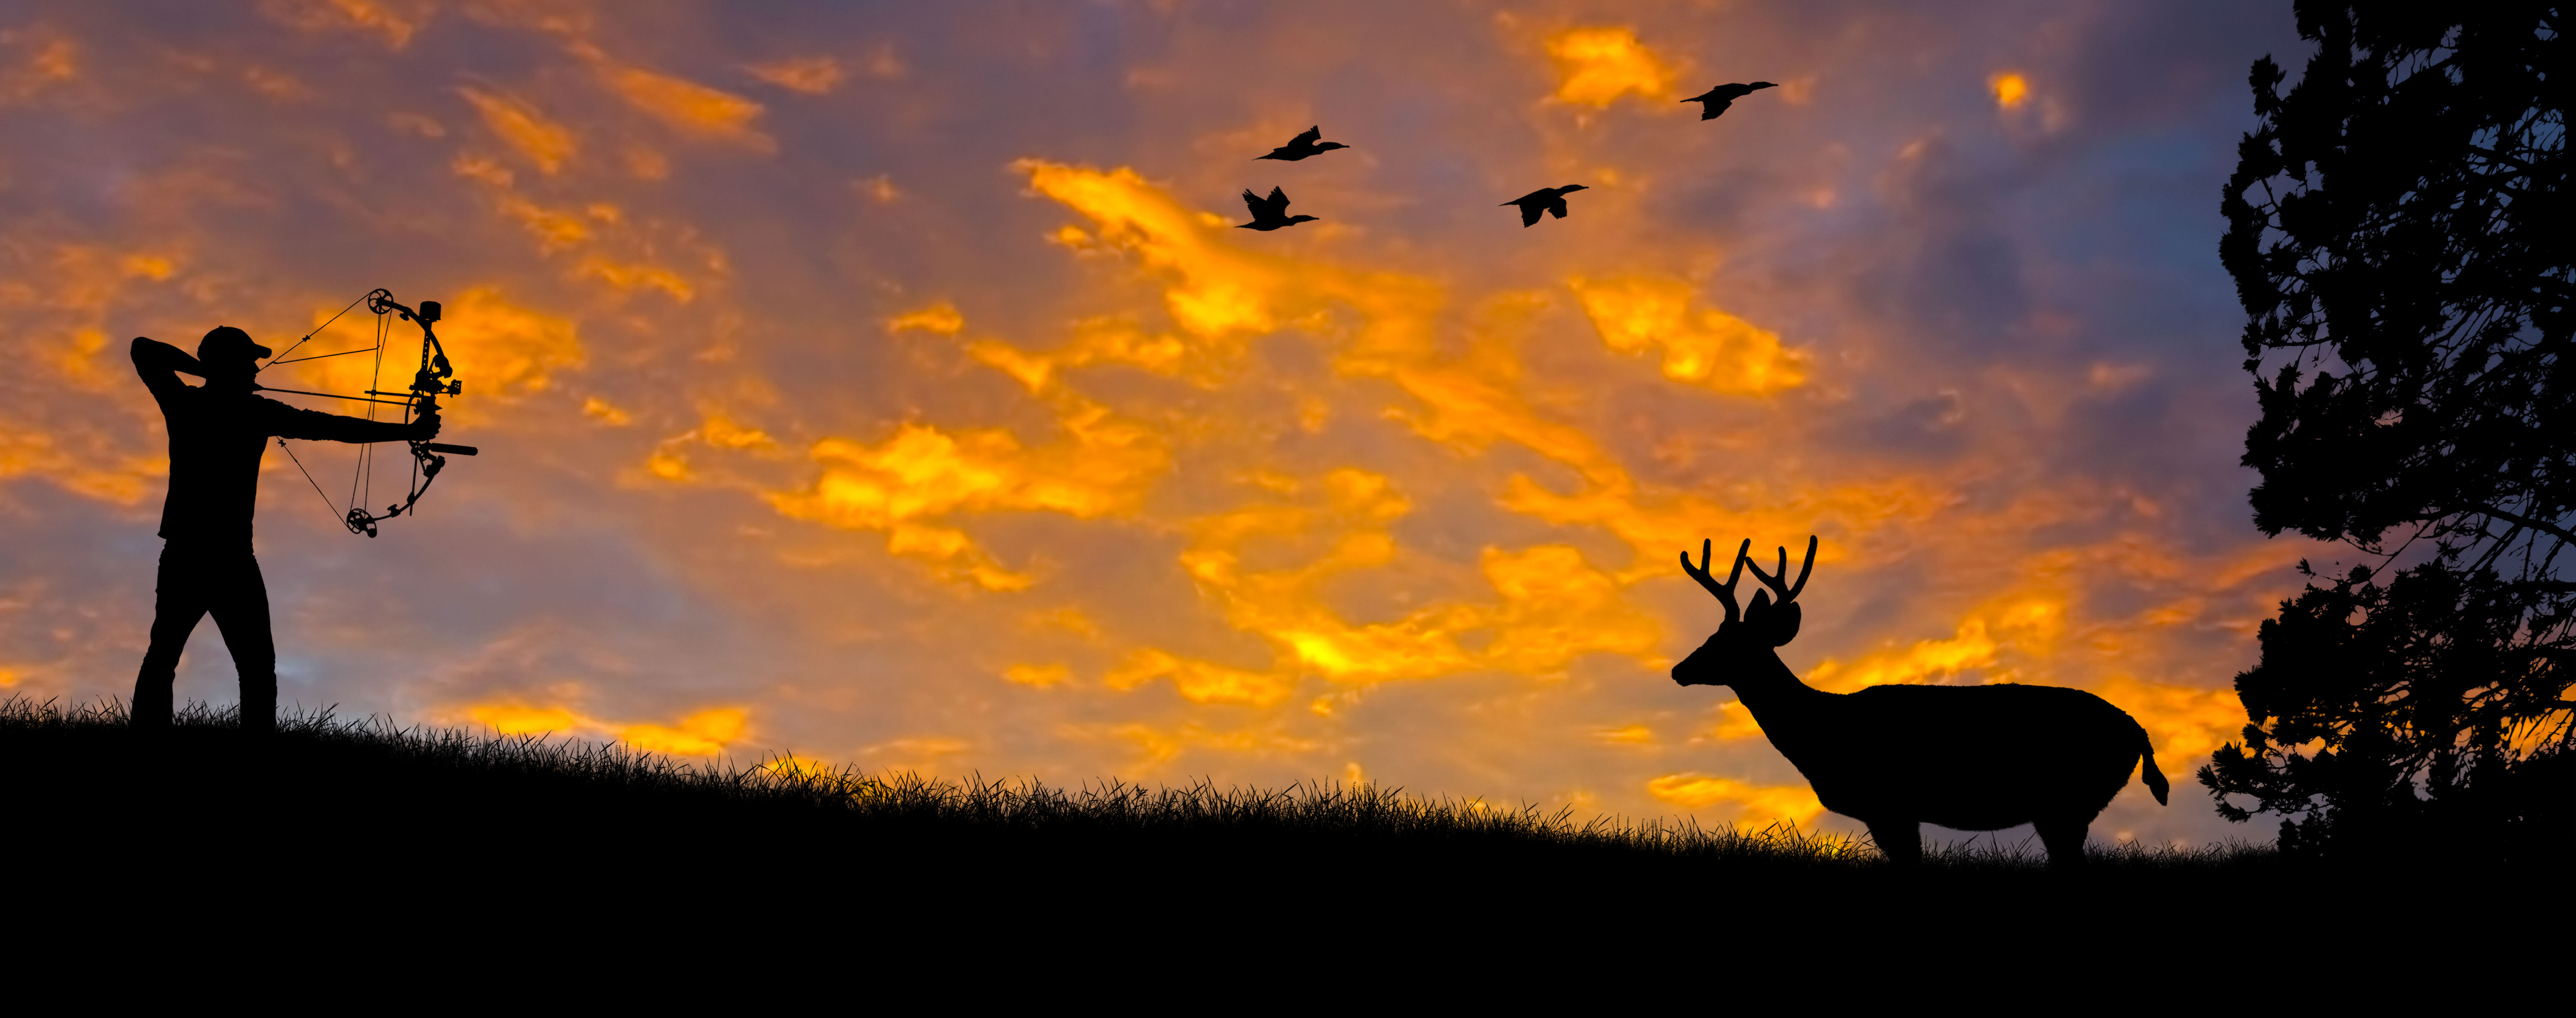 deer in bow hunter sights at sunset